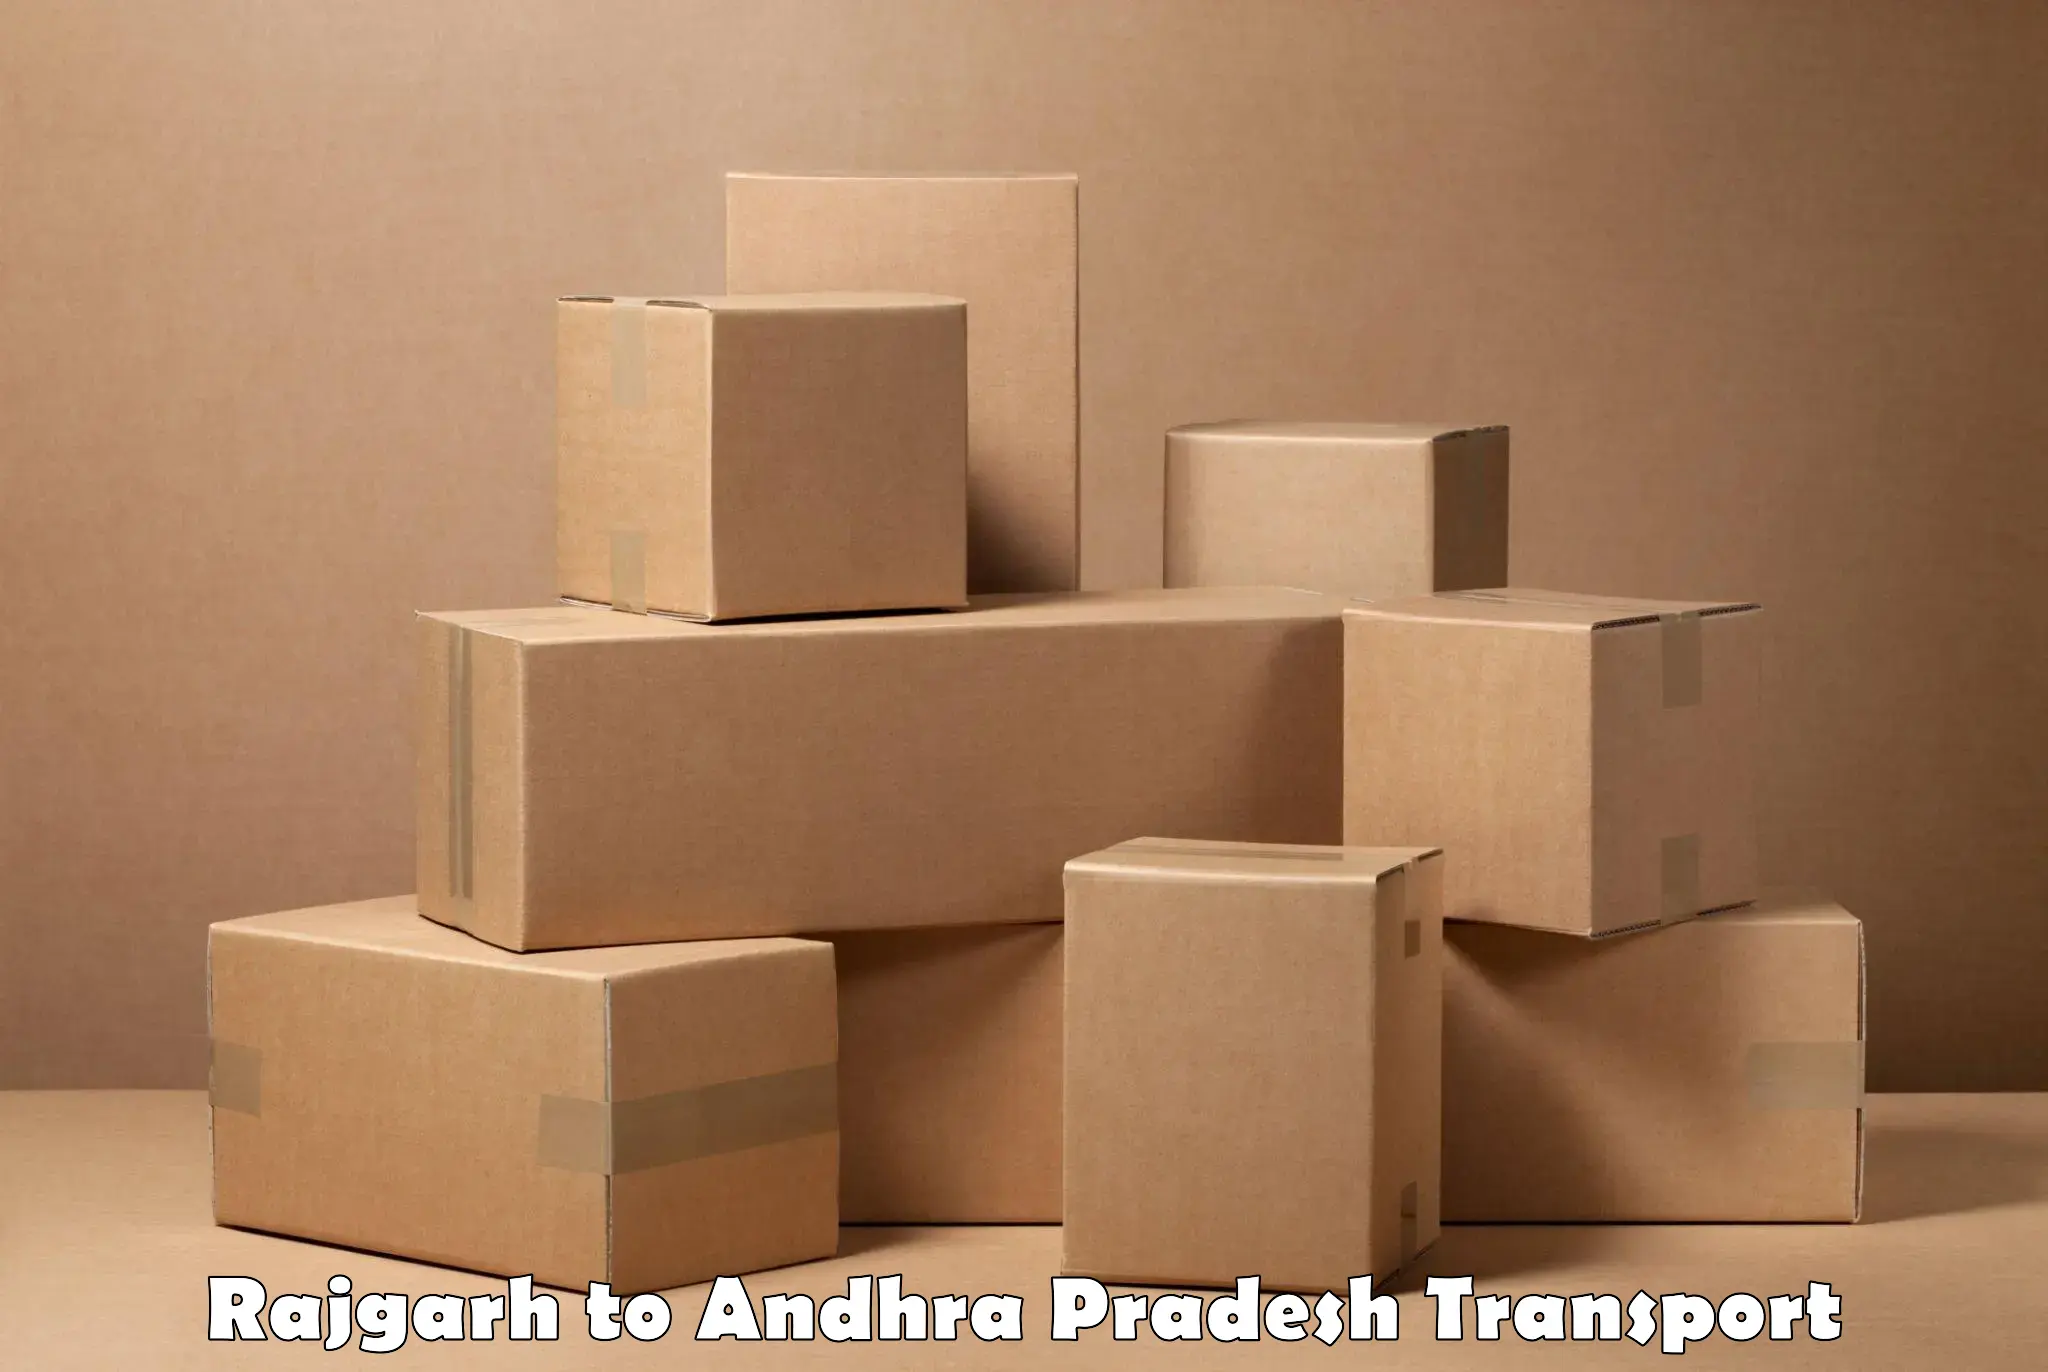 Truck transport companies in India Rajgarh to Pathapatnam